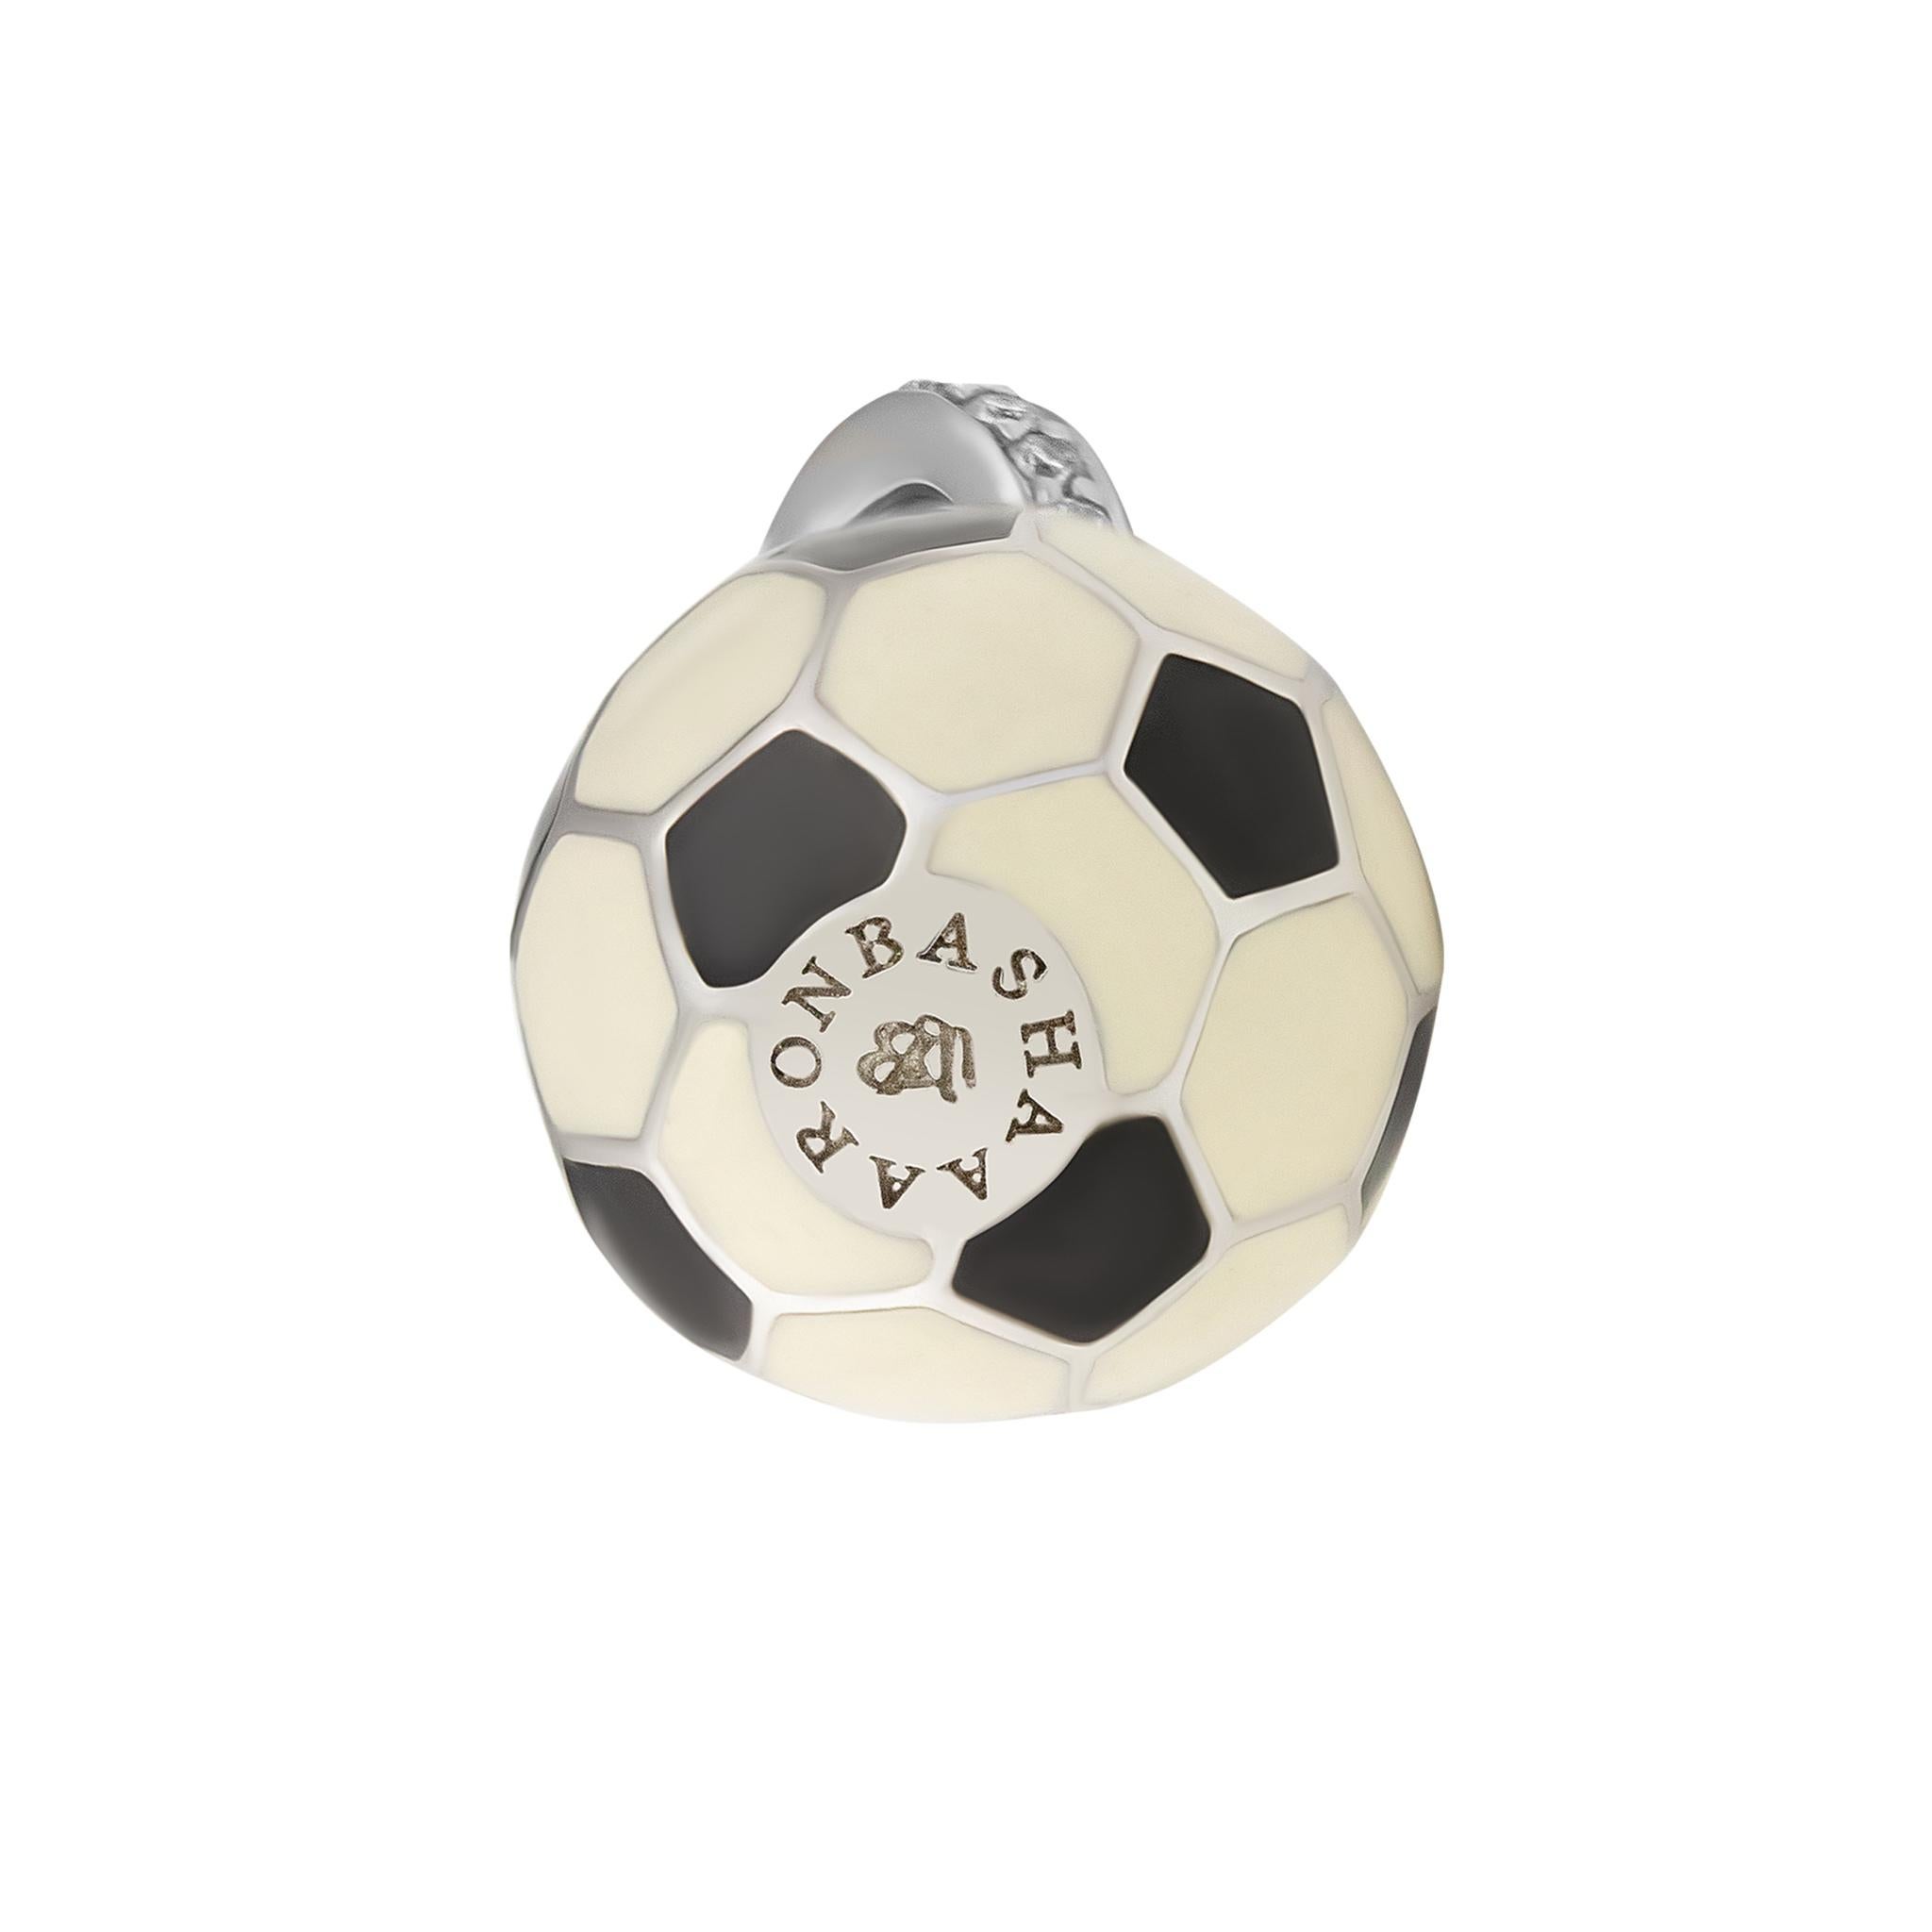 Soccer Ball Charm
Diamond
Reference number: ABS01283